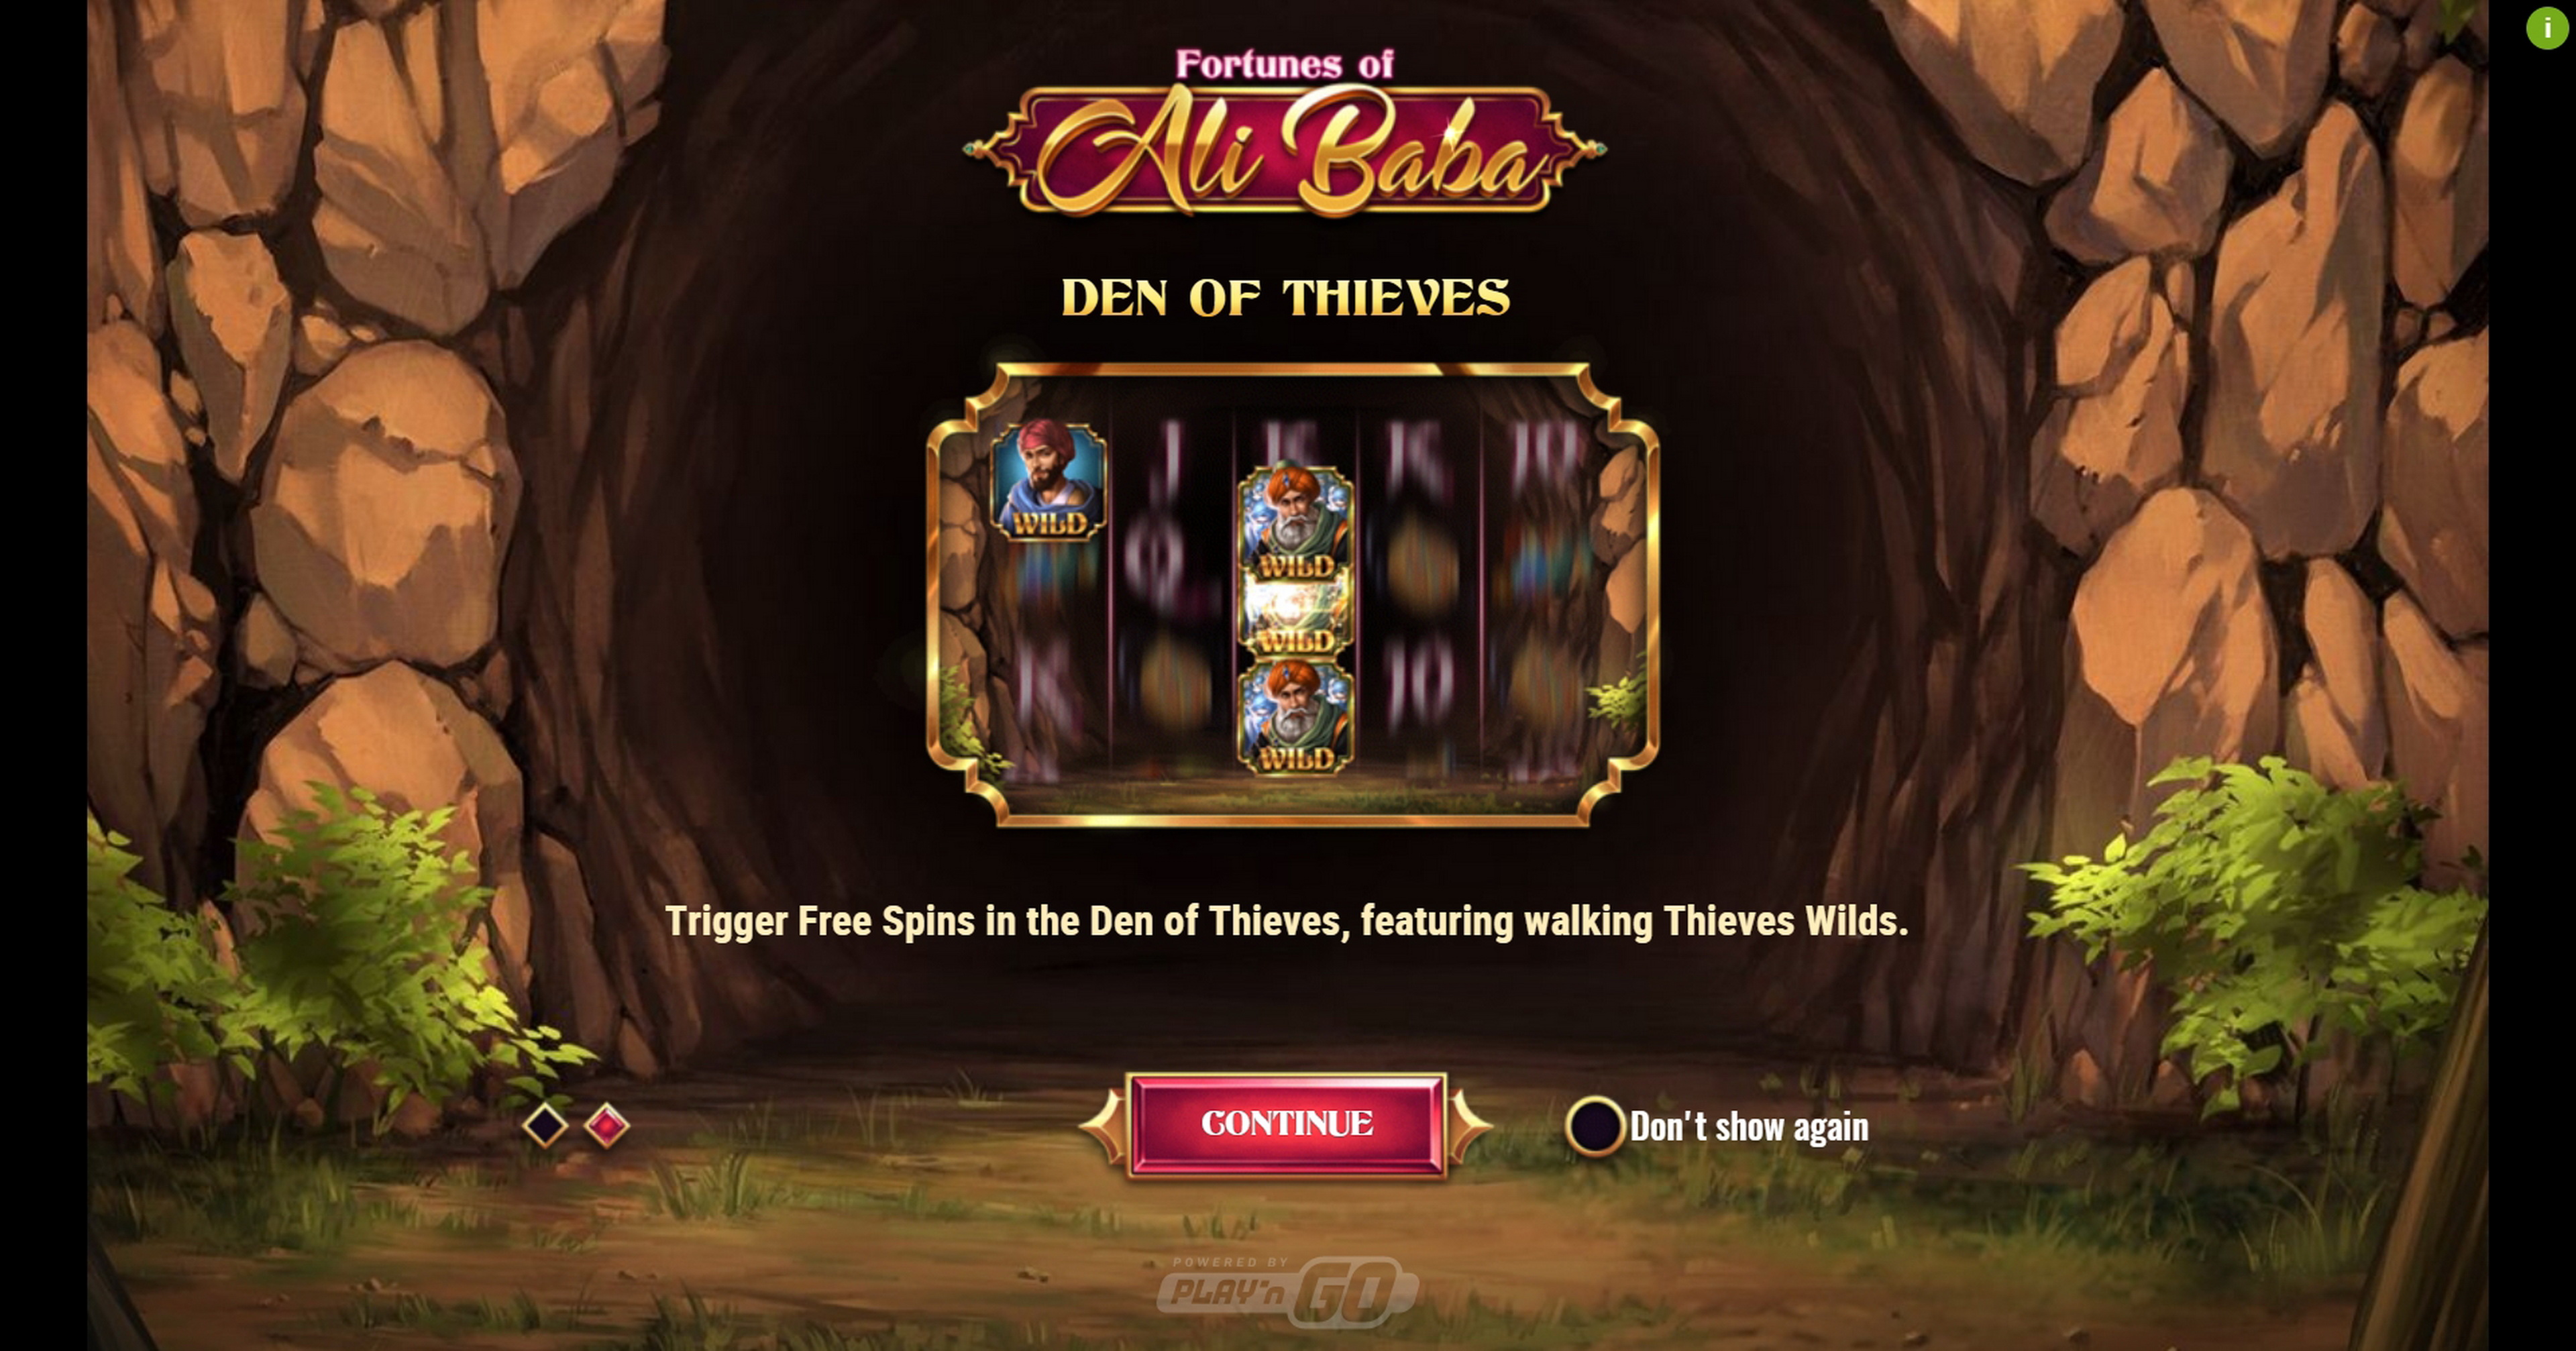 Play Fortunes of Alibaba Free Casino Slot Game by Playn GO